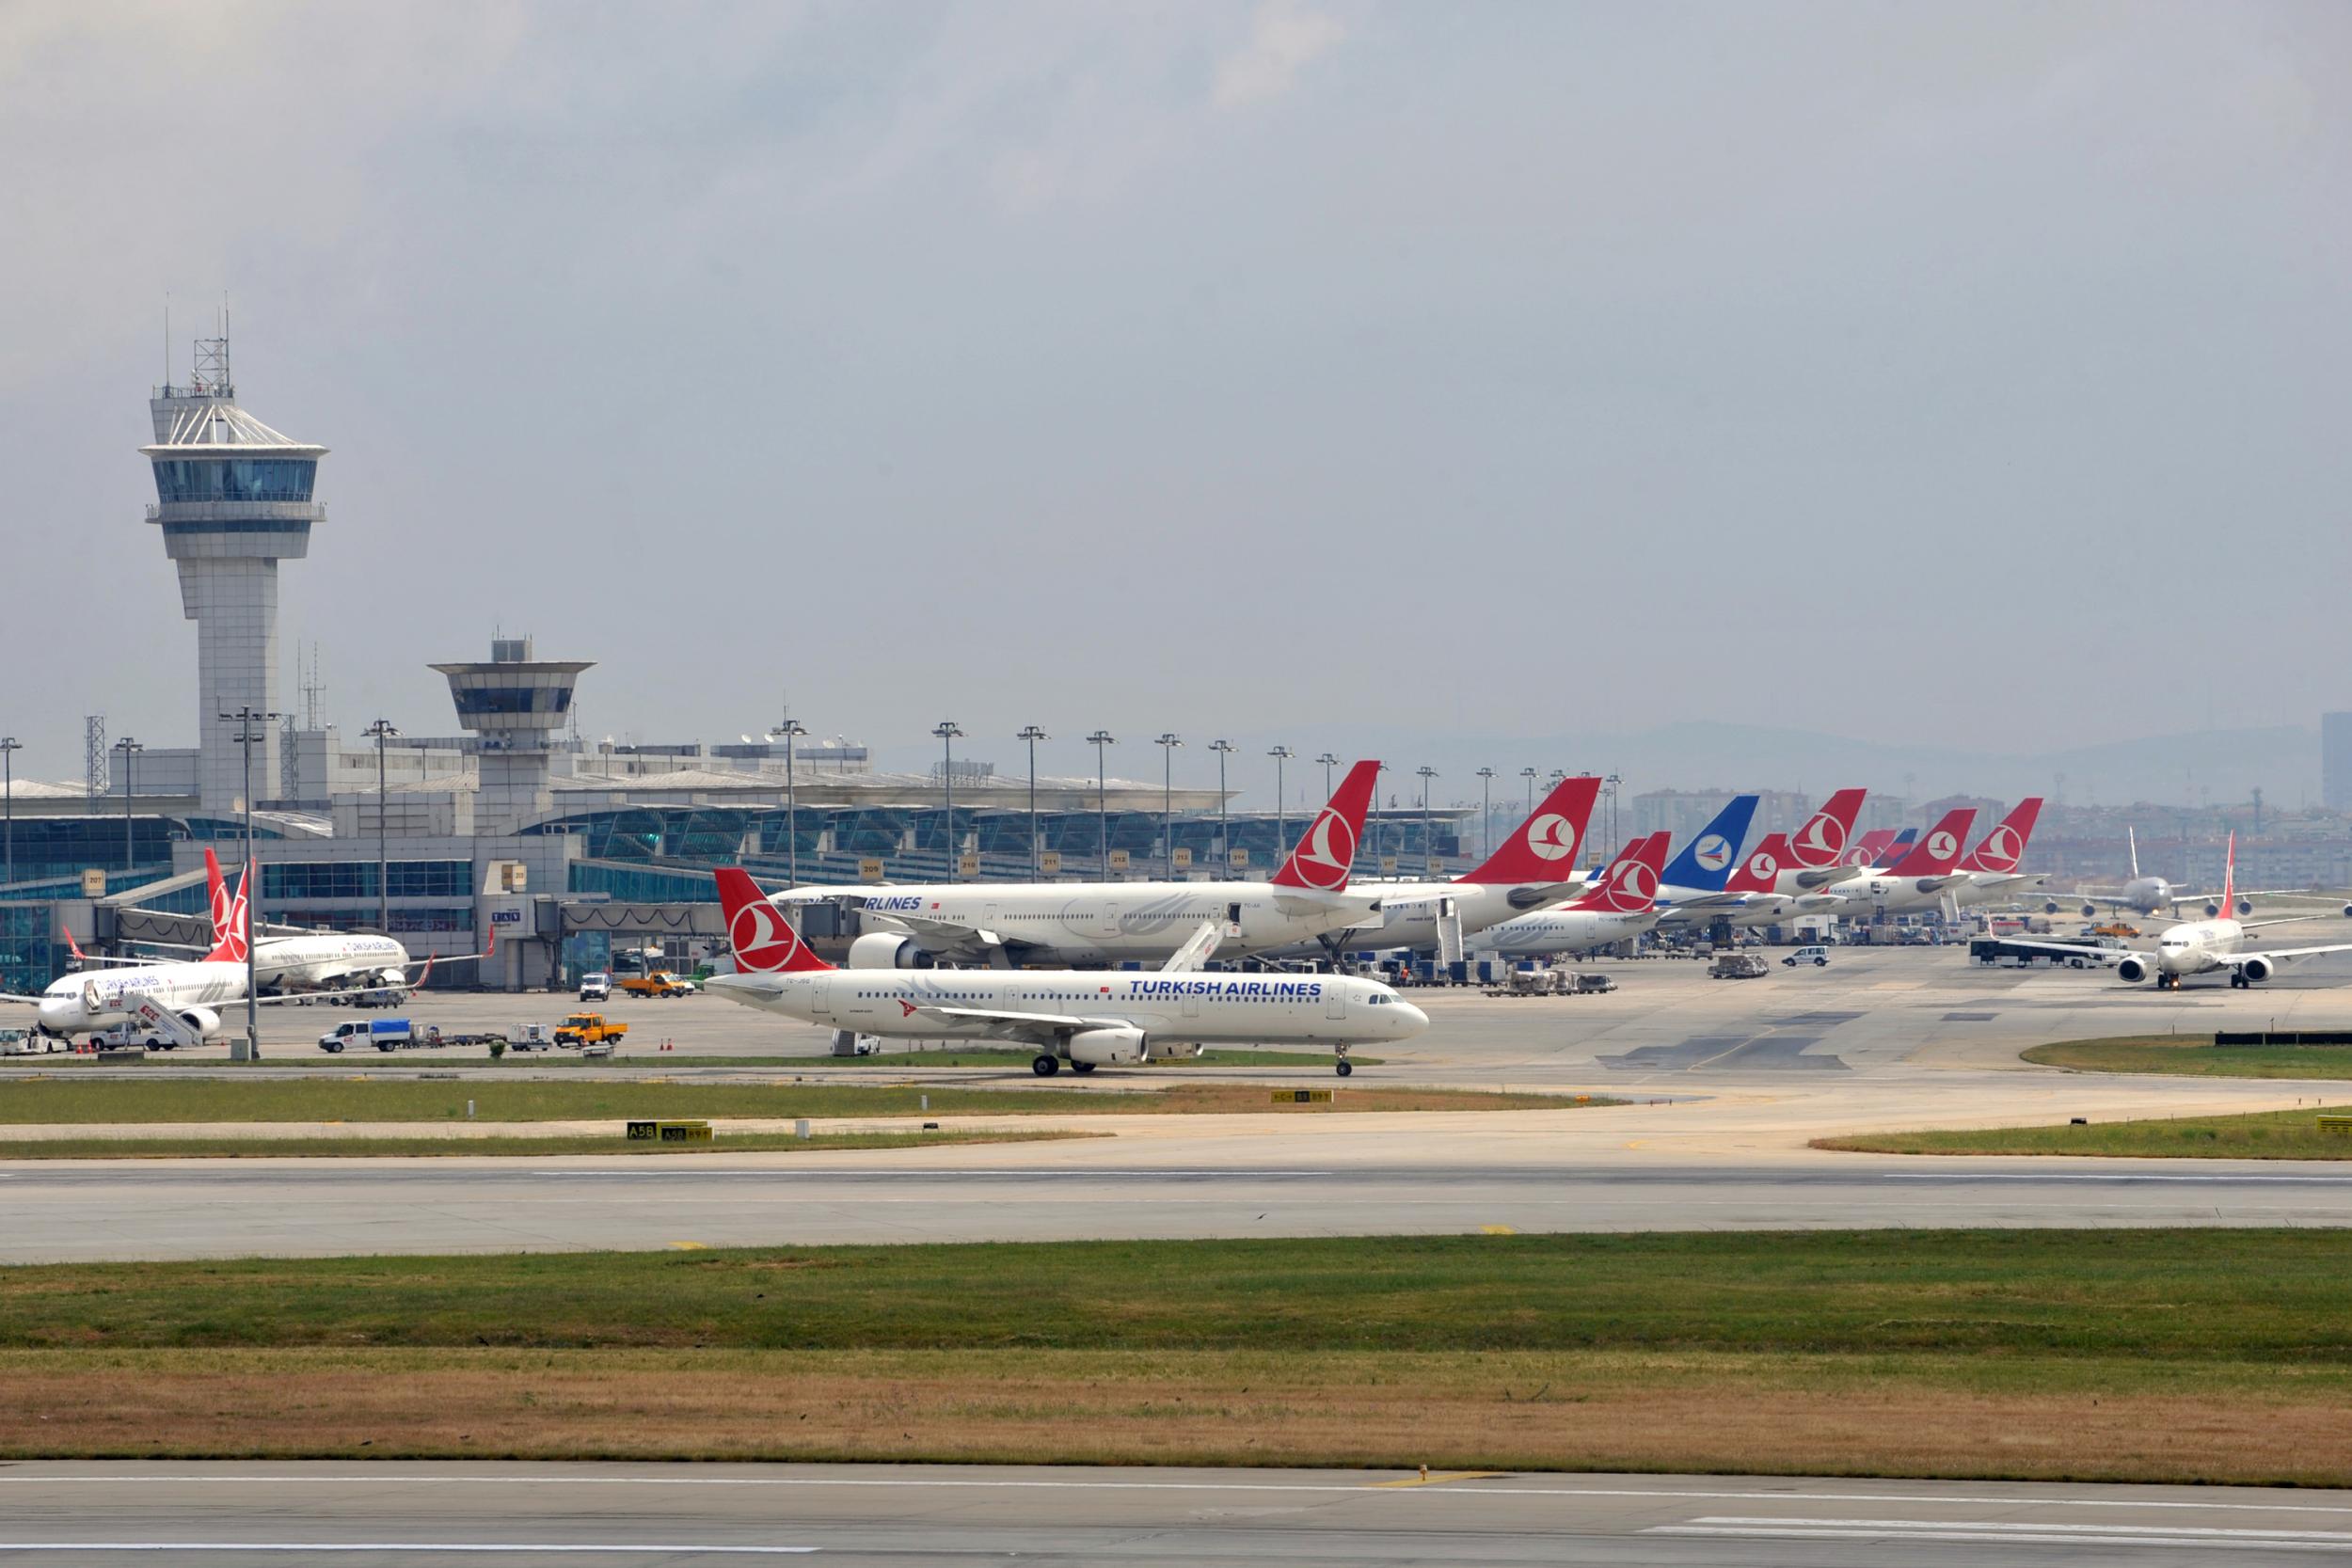 Ataturk Airport in Istanbul is not closed despite false reports, say offcials